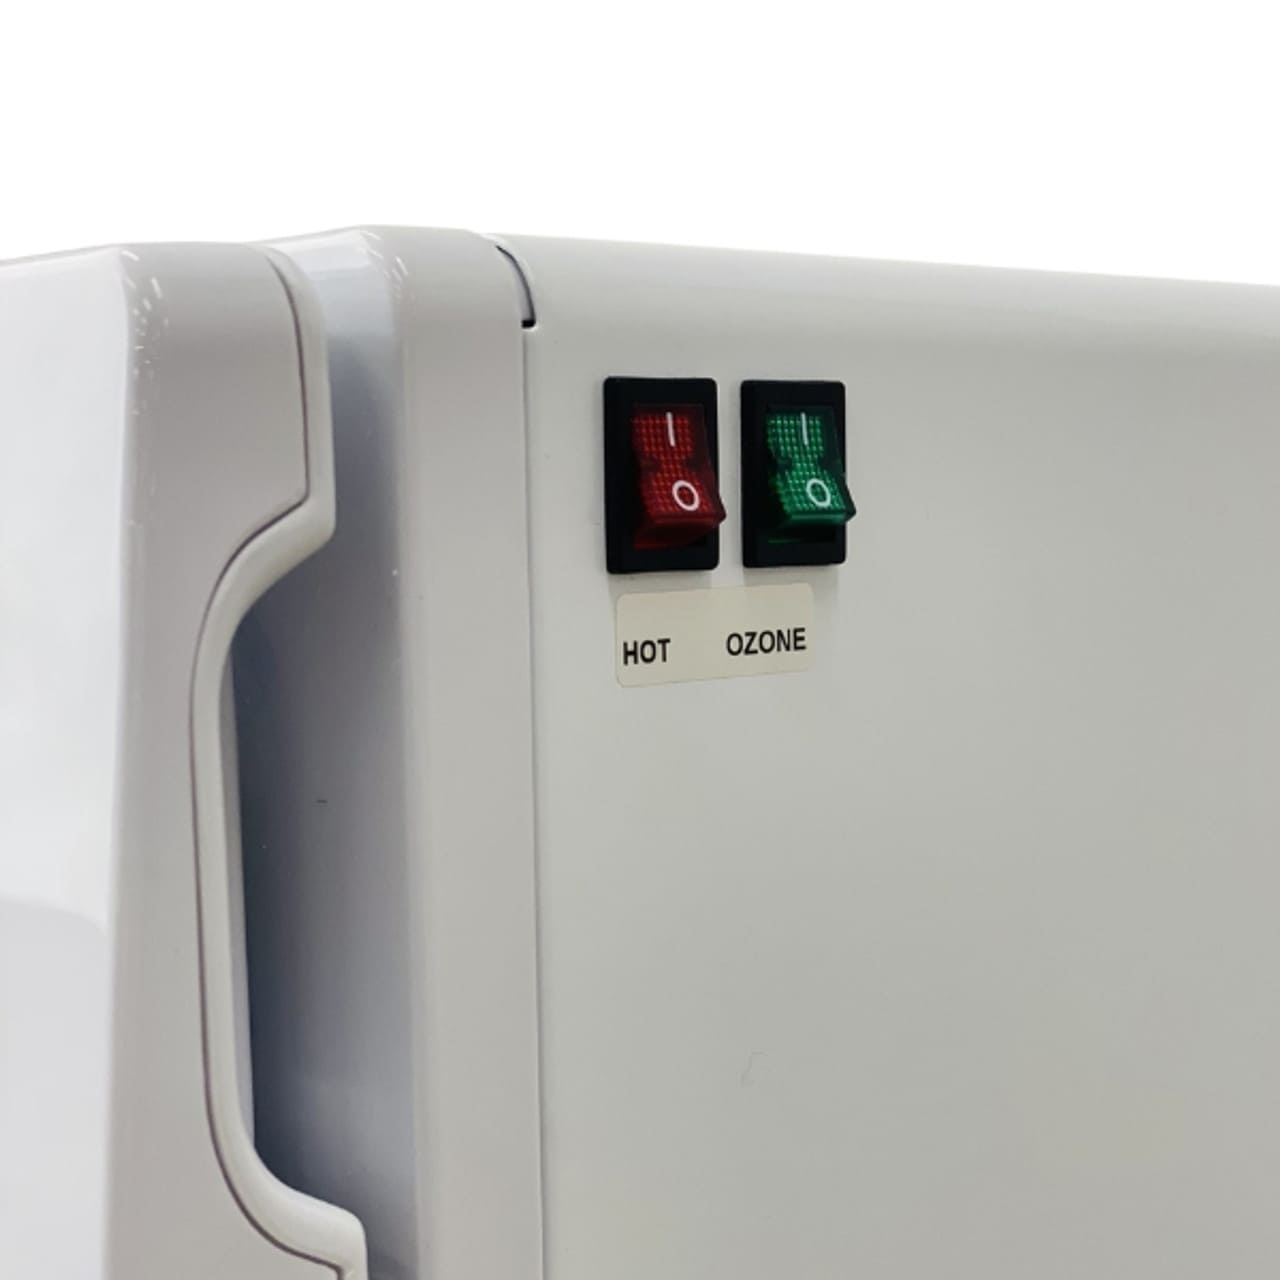 Joiken Opal hot towel cabinet ozone showing switches - Luna Beauty Supplies